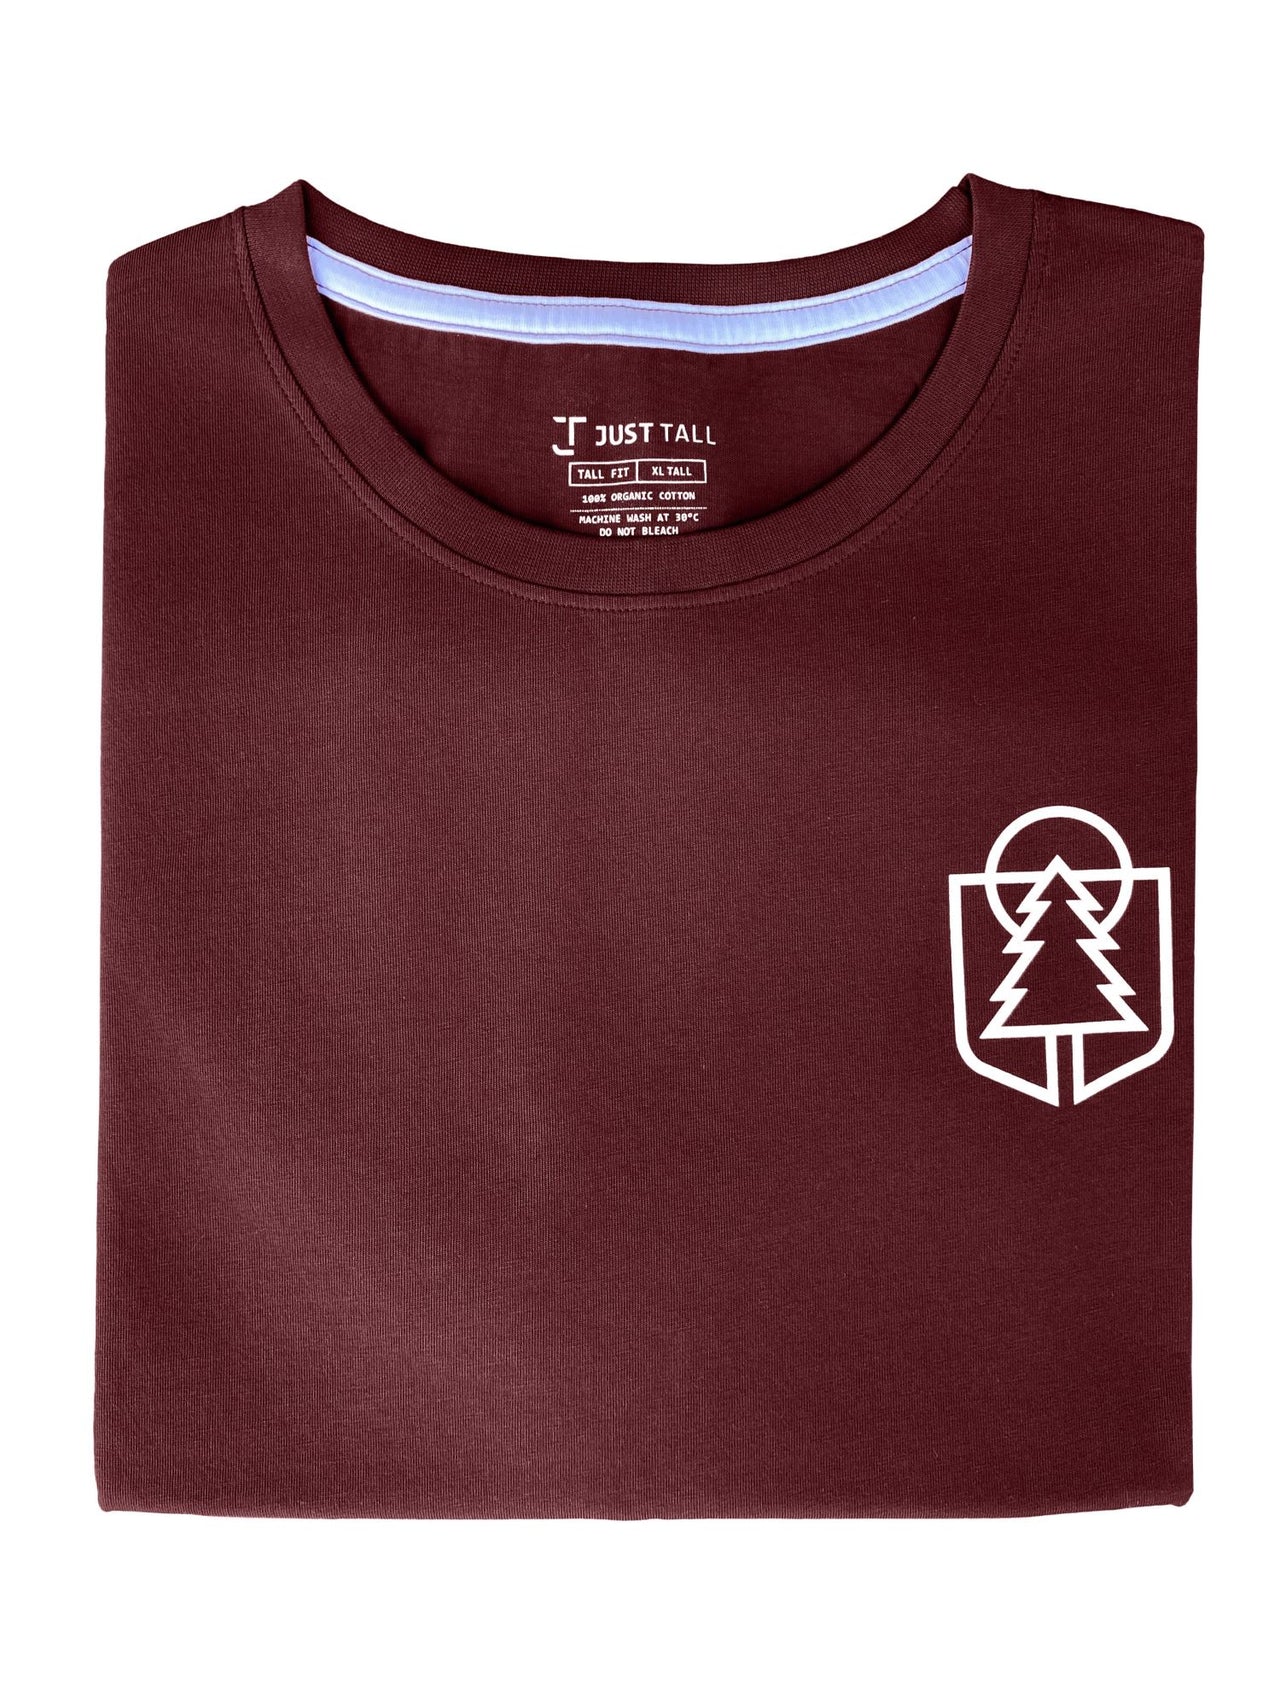 A close up of a tall maroon graphic t-shirt.